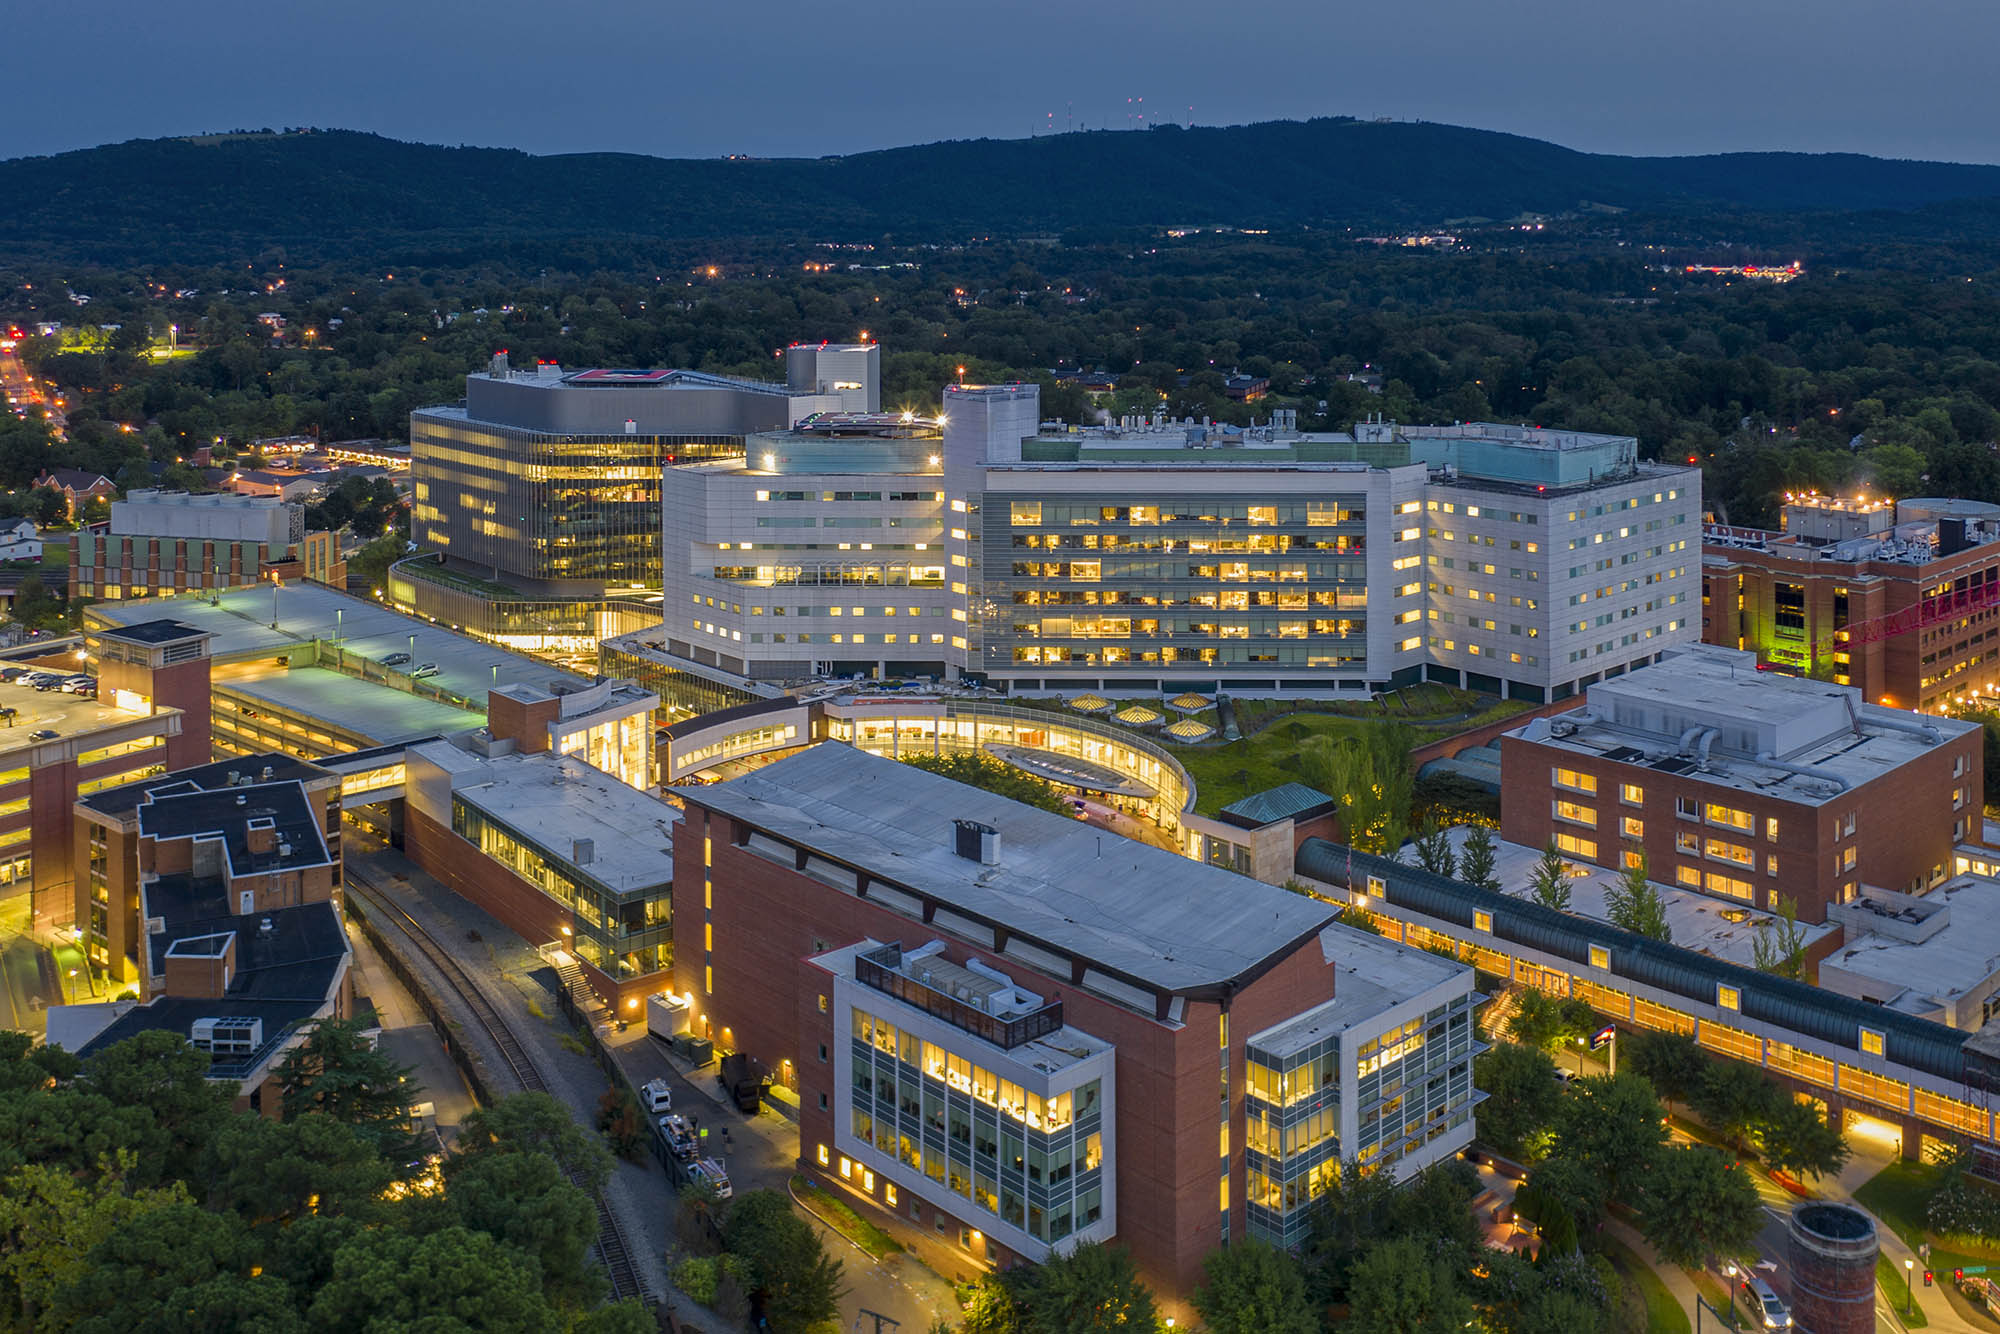 Aerial view of the UVA Health Center Buildings at night